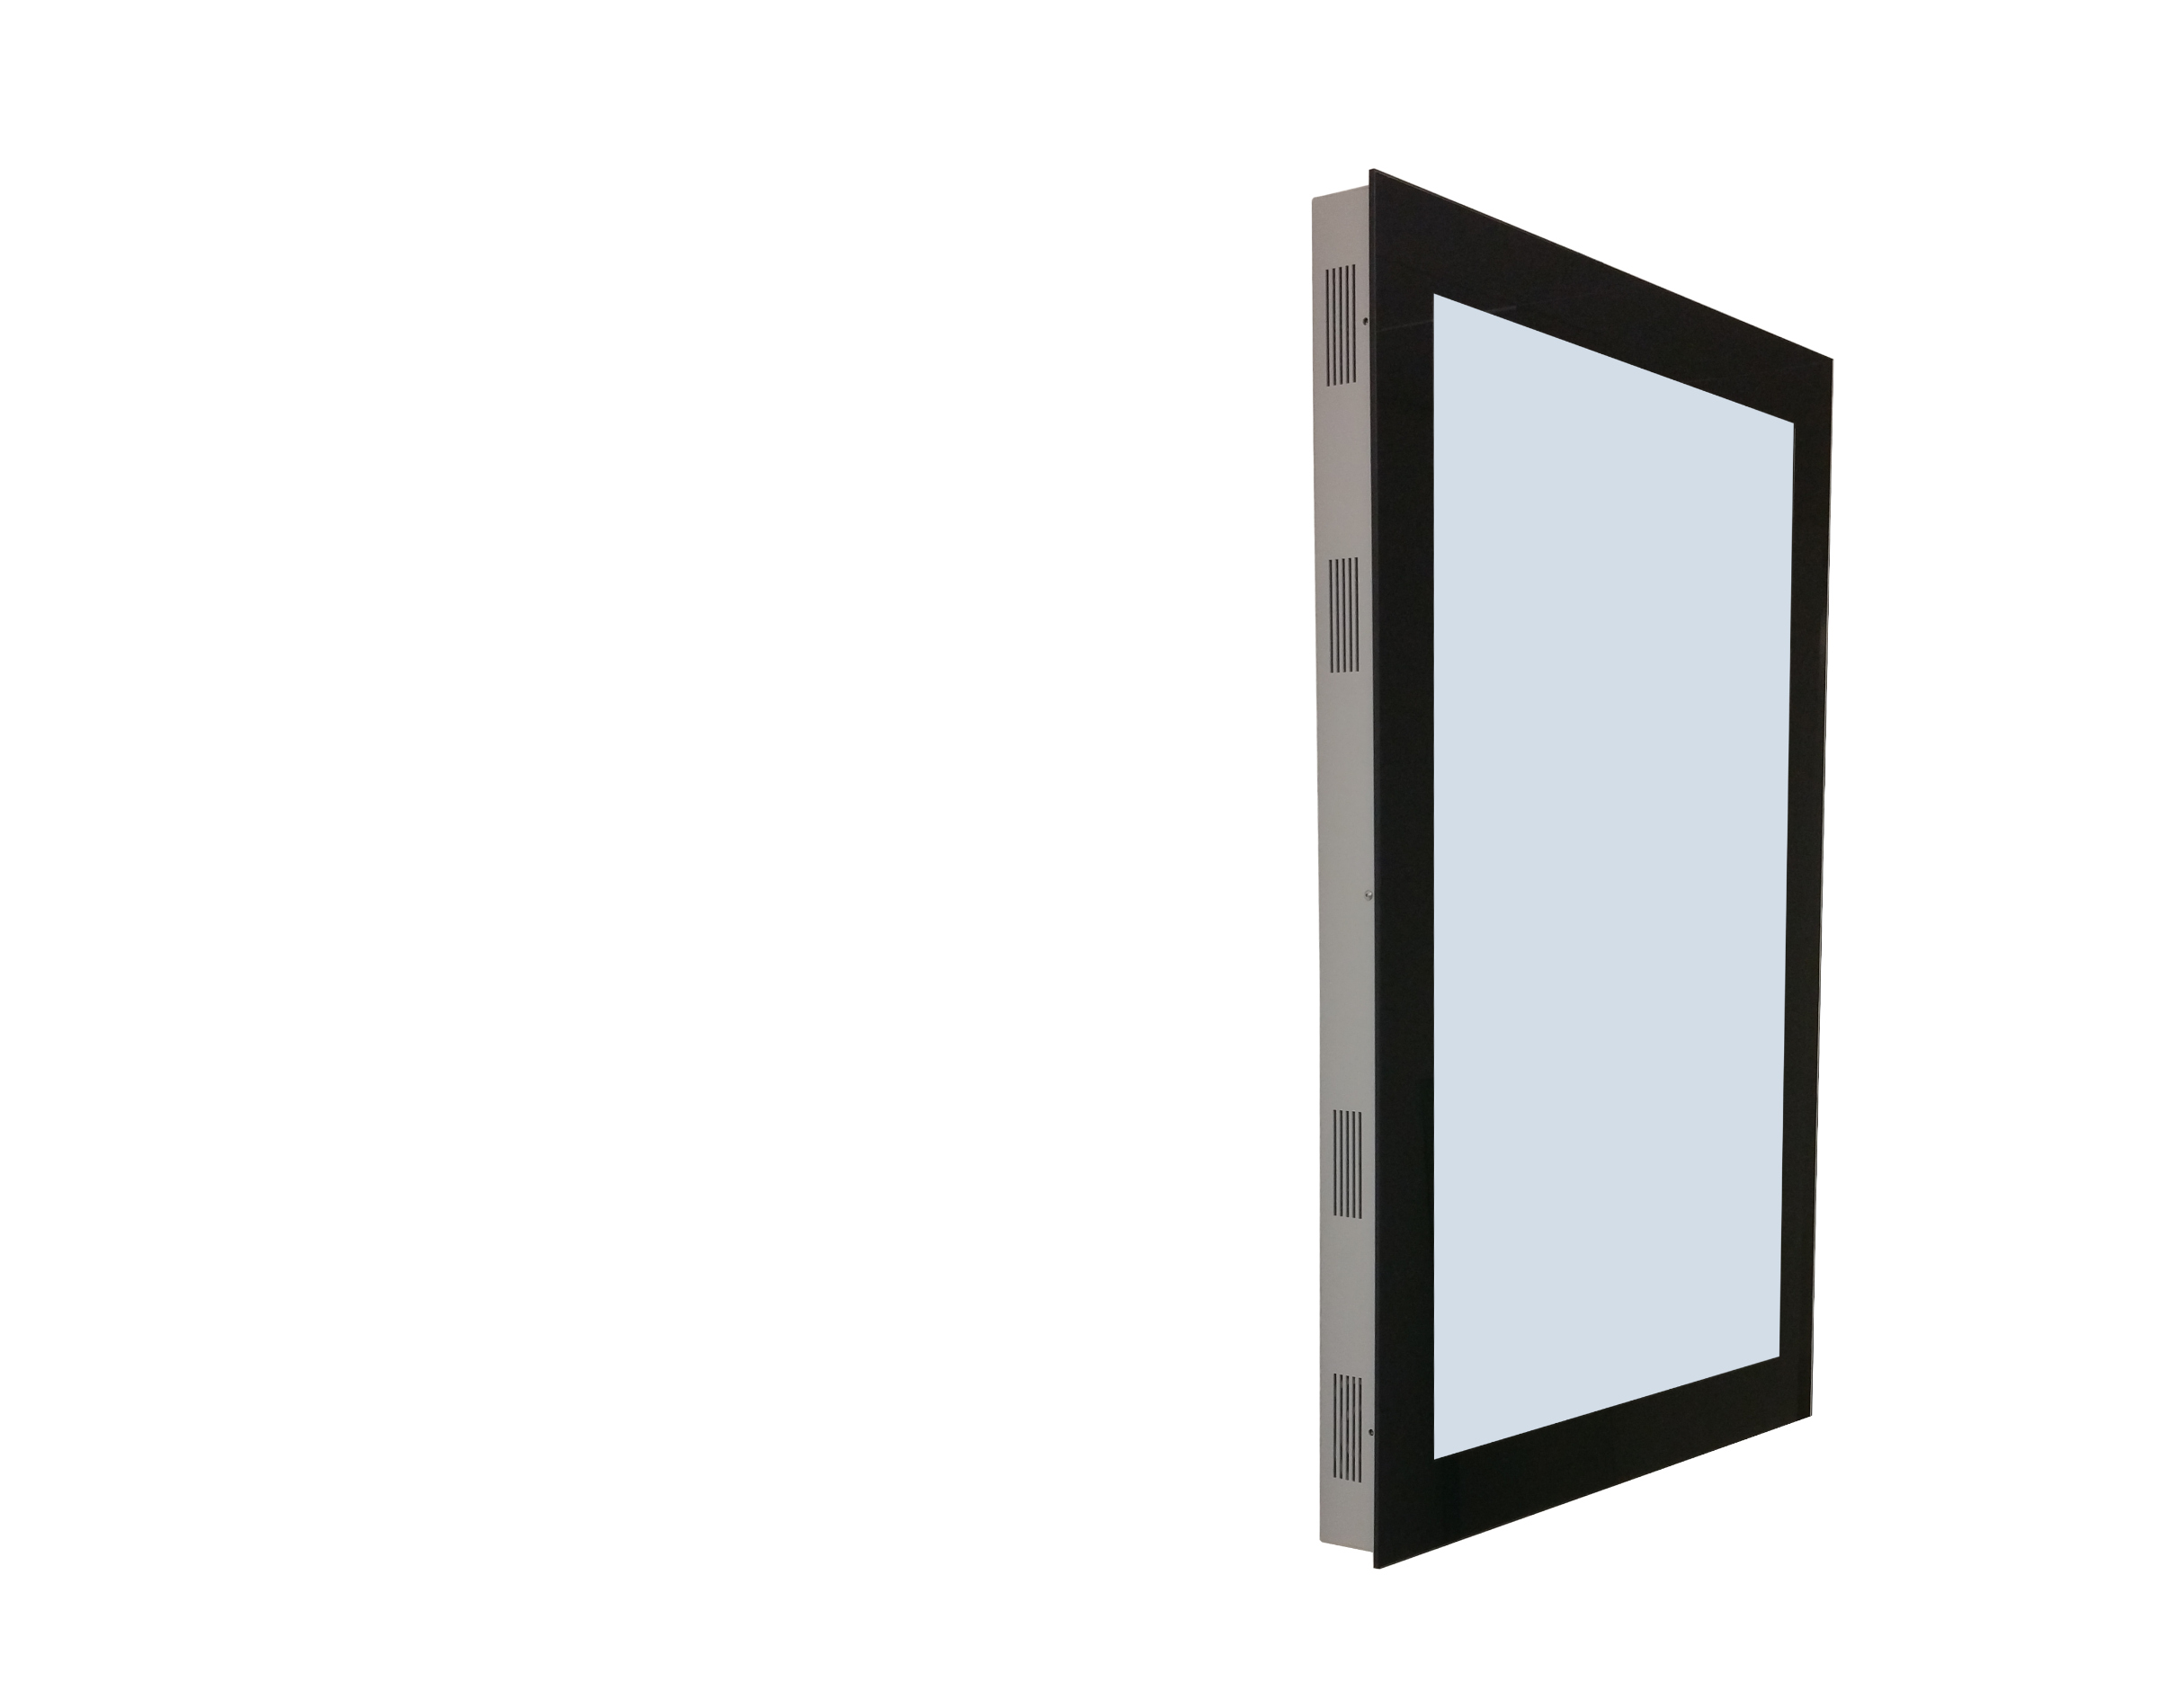 Displays for wall-mounting